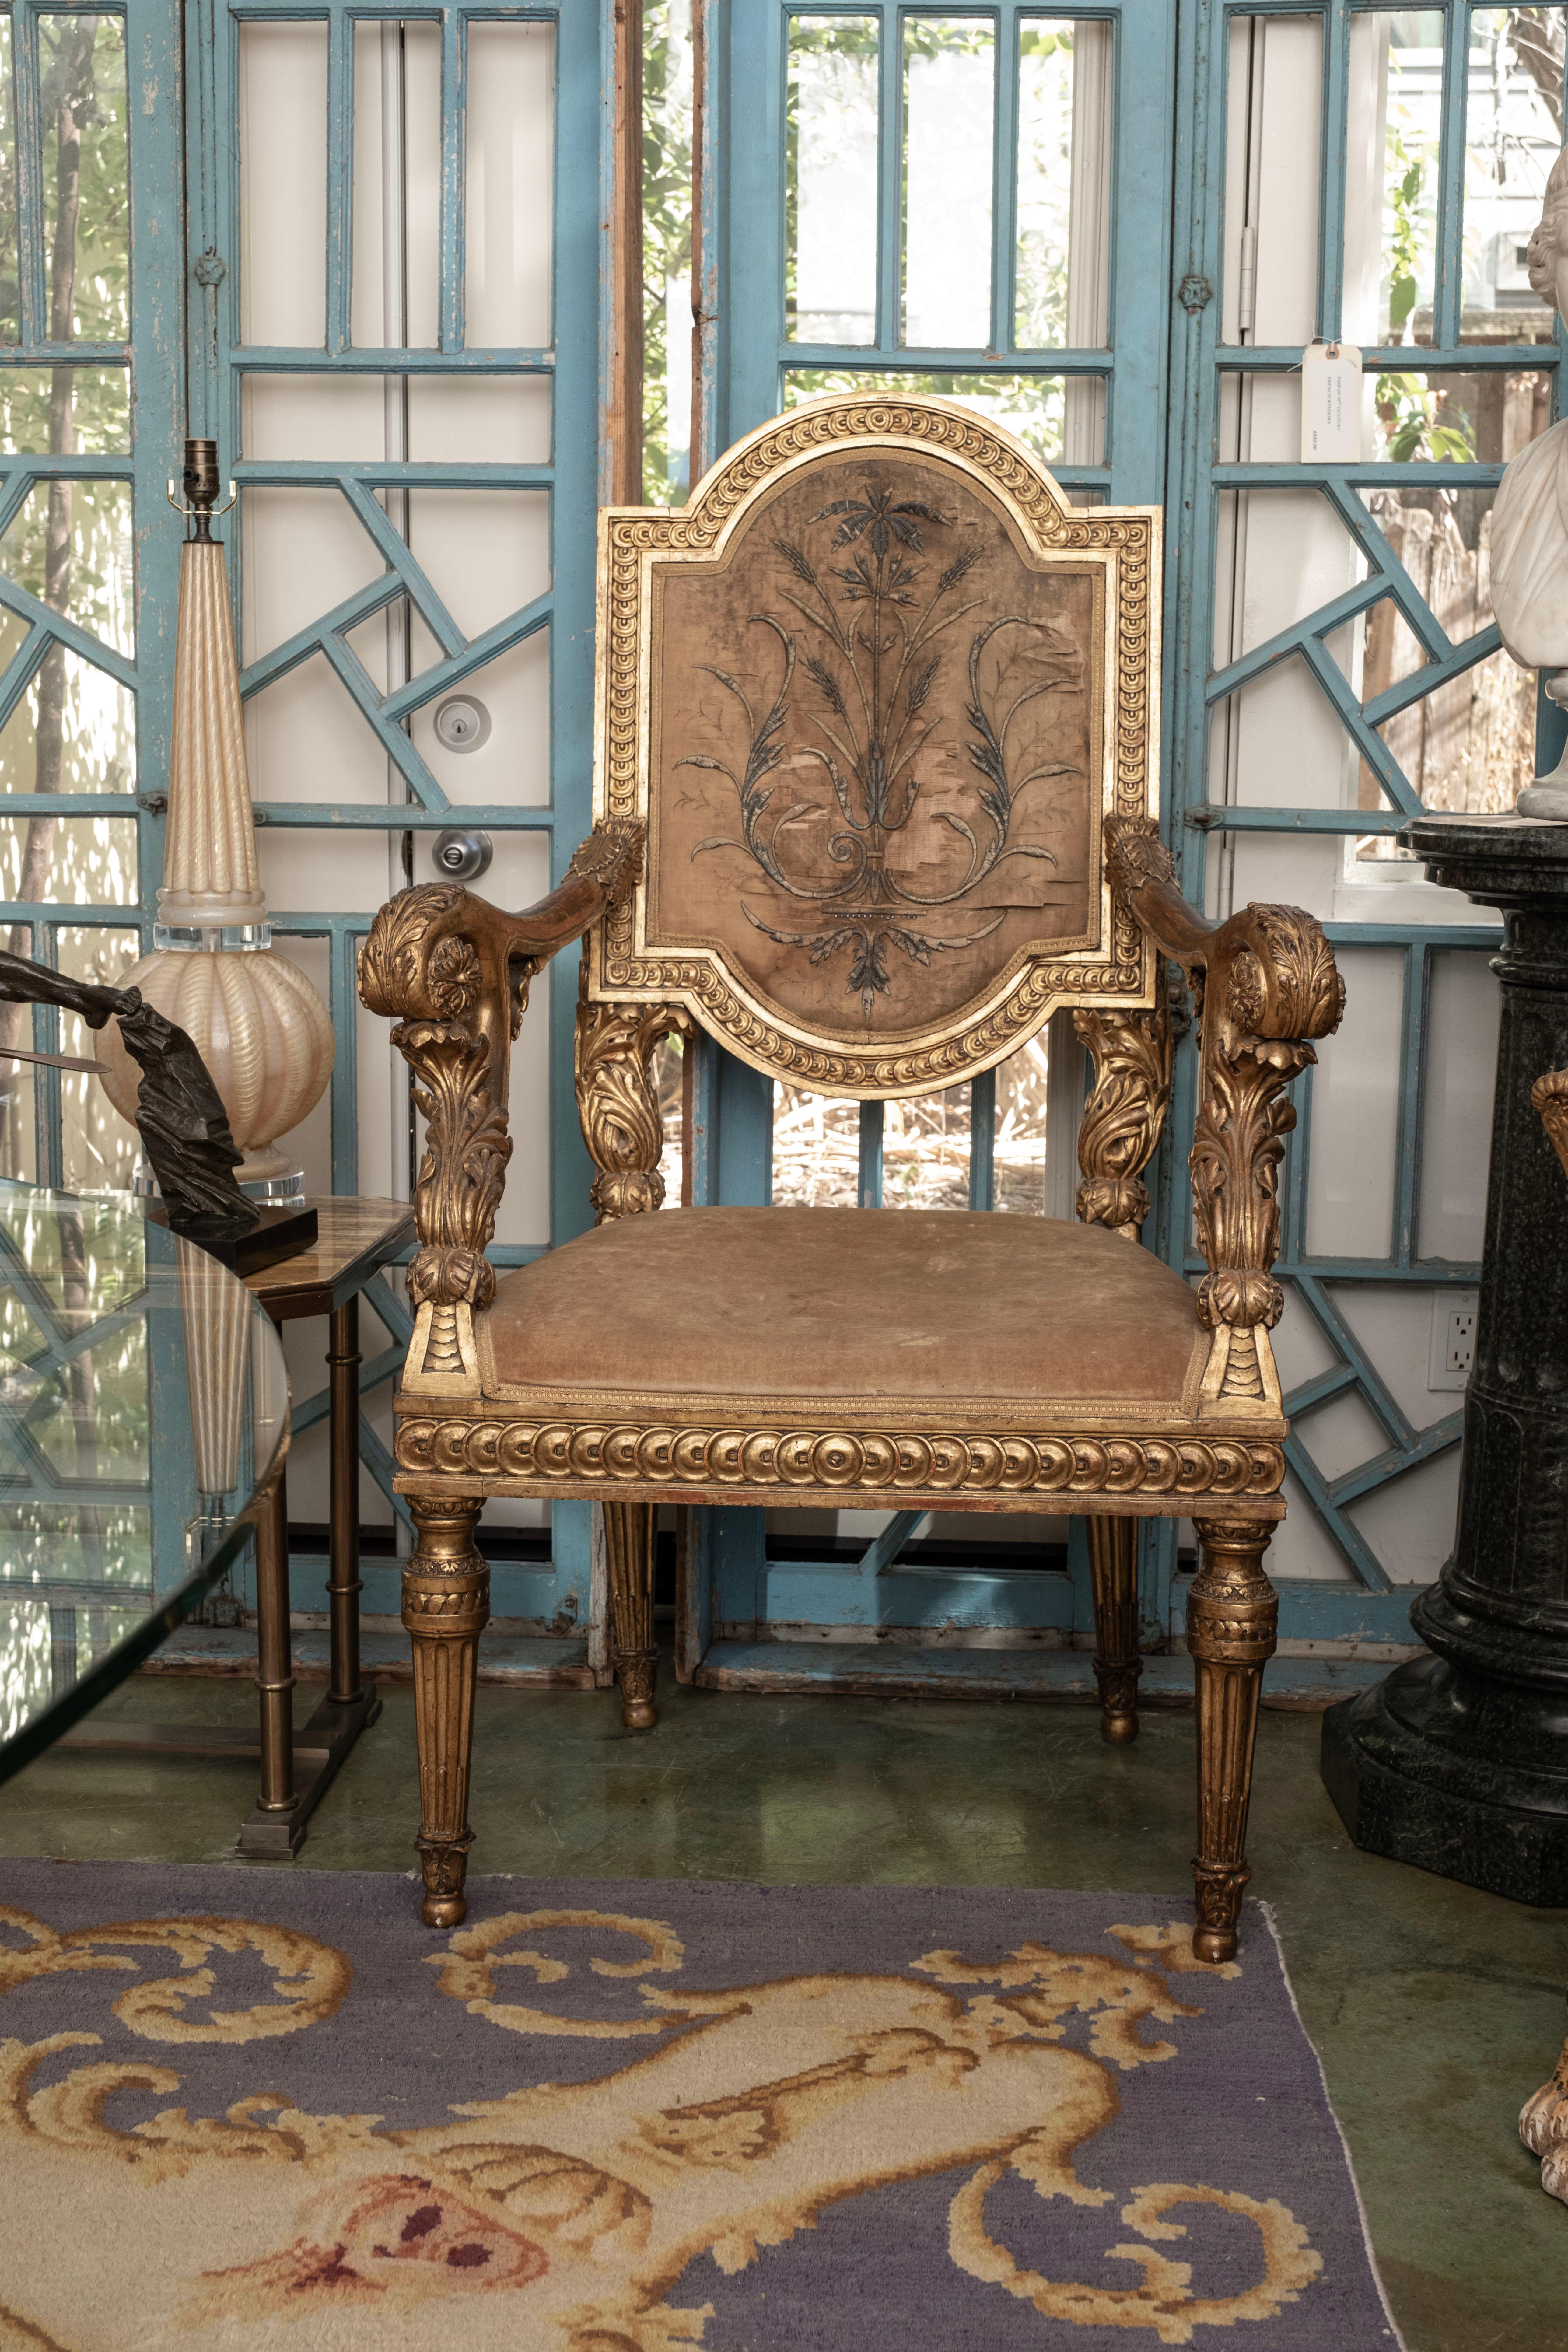 Monumental 18th century Venetian Louis XVI giltwood chair.
This stunning oversized 18th century Italian Louis XVI gilt wood chair, armchair or throne chair is in very good antique condition. The upholstery
is old, possibly original. Leave as is or